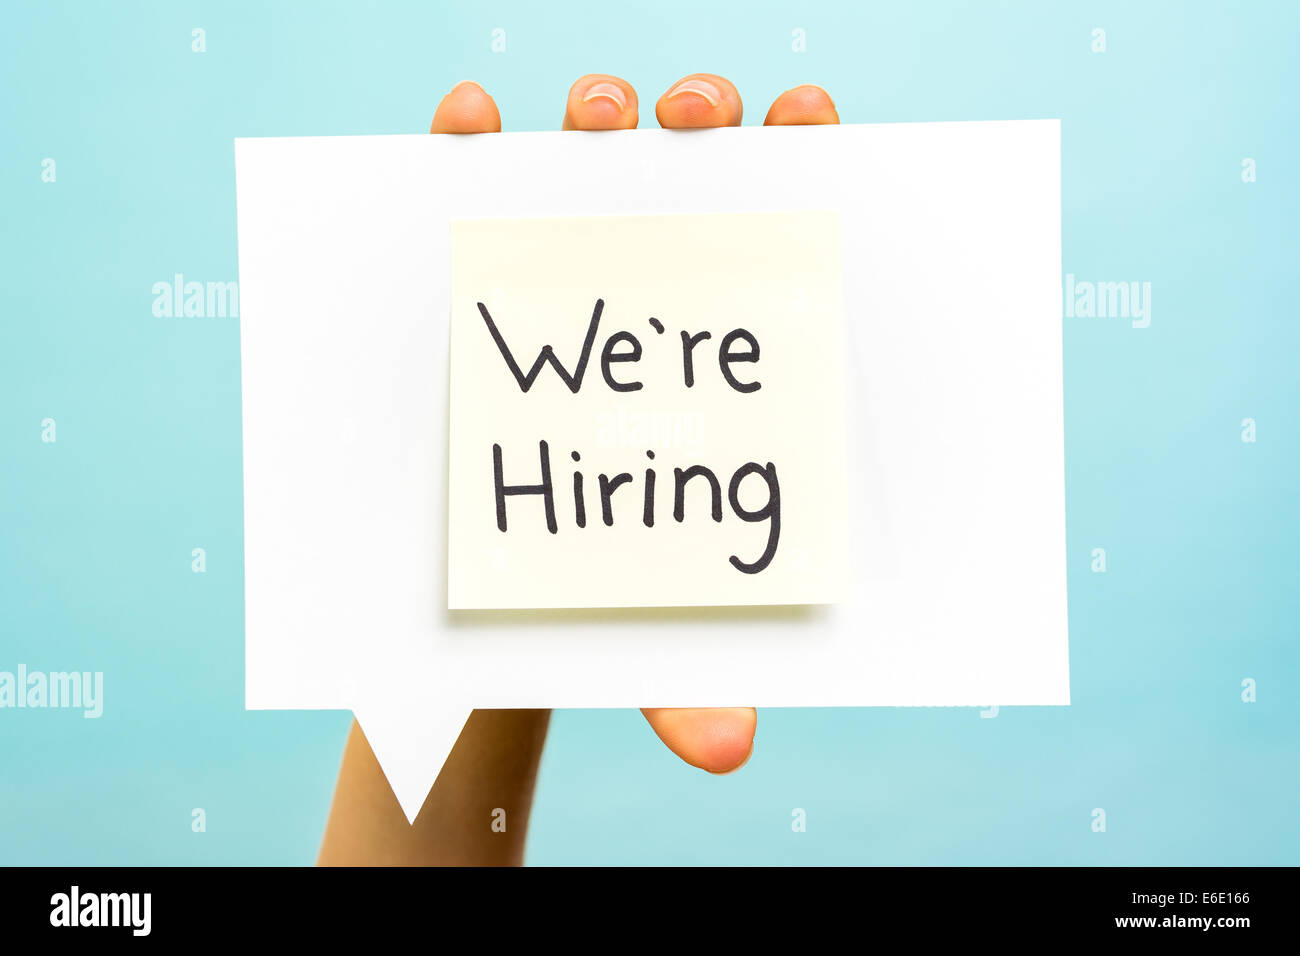 We are hiring message concept on speech bubble Stock Photo